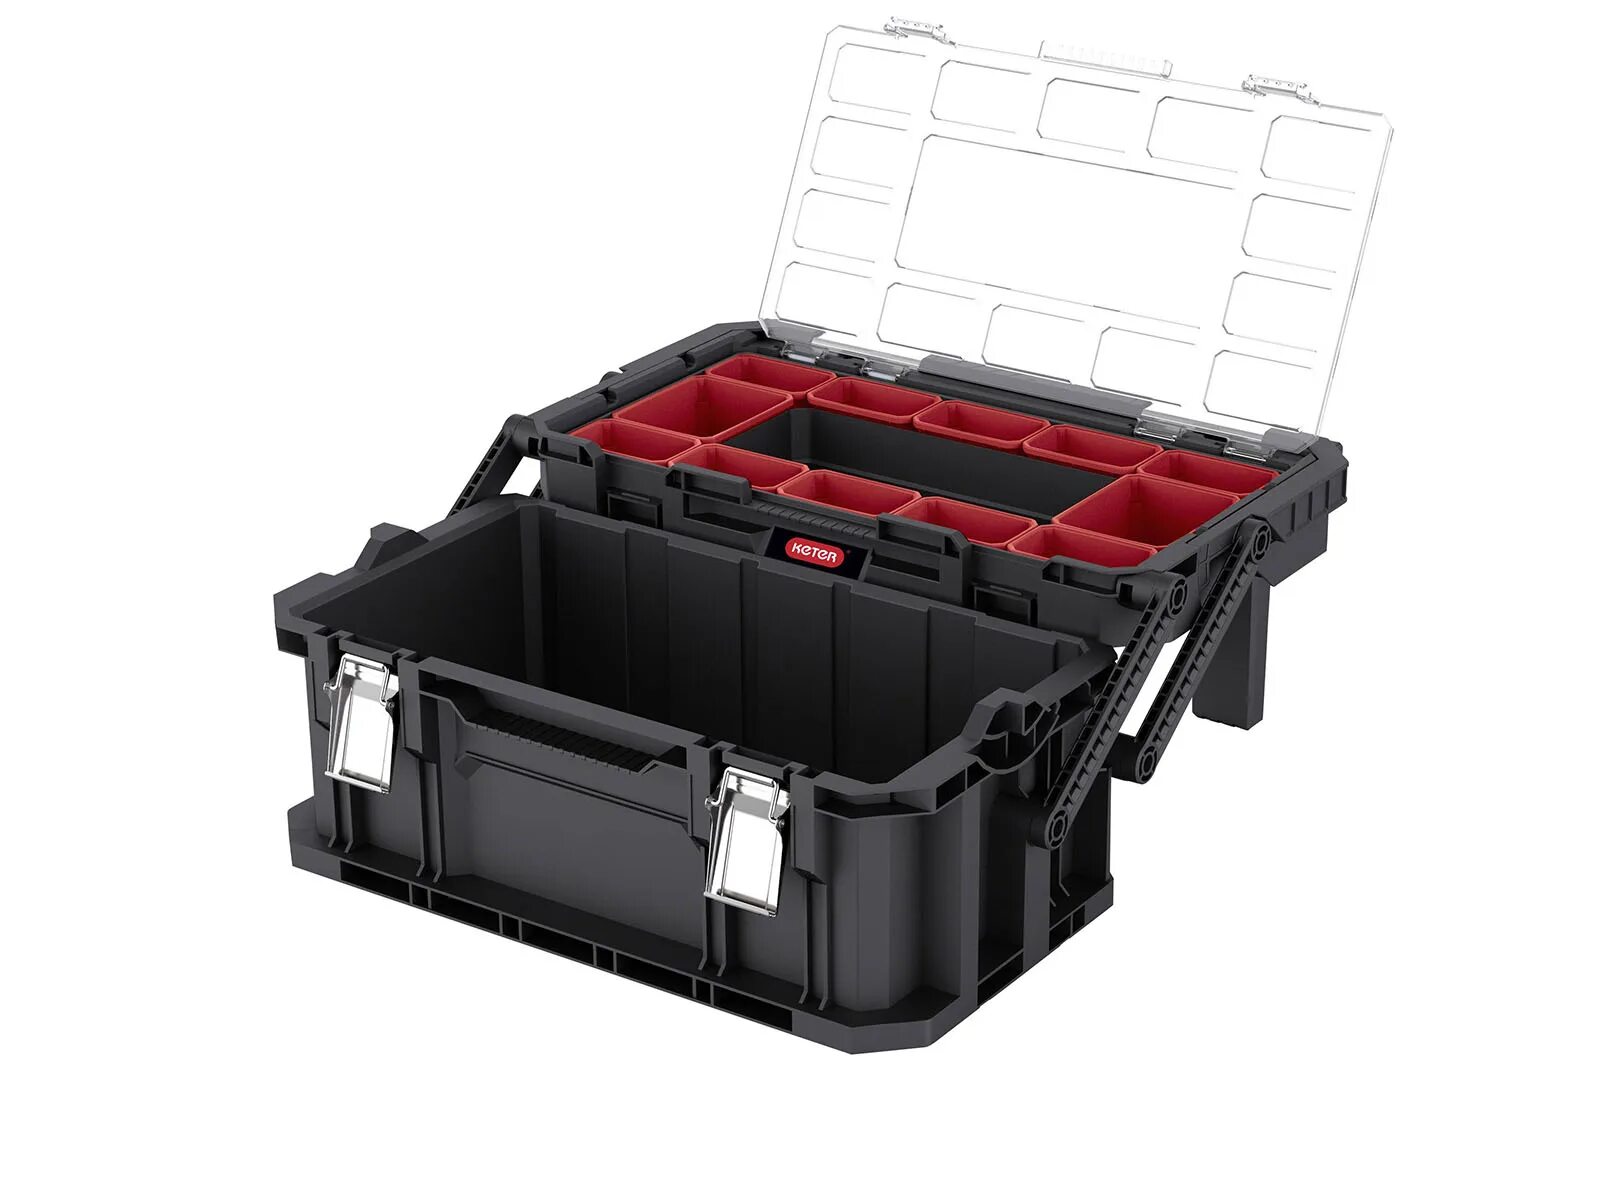 Keter rolling. Keter connect Cantilever Tool Box. Keter connect Cantilever Tool Box 17203104. Ящик для инструмента "connect Cantiliver Tool Box" 56,5*31,7*25,1 см (черный) "Keter". Keter connect 250037.